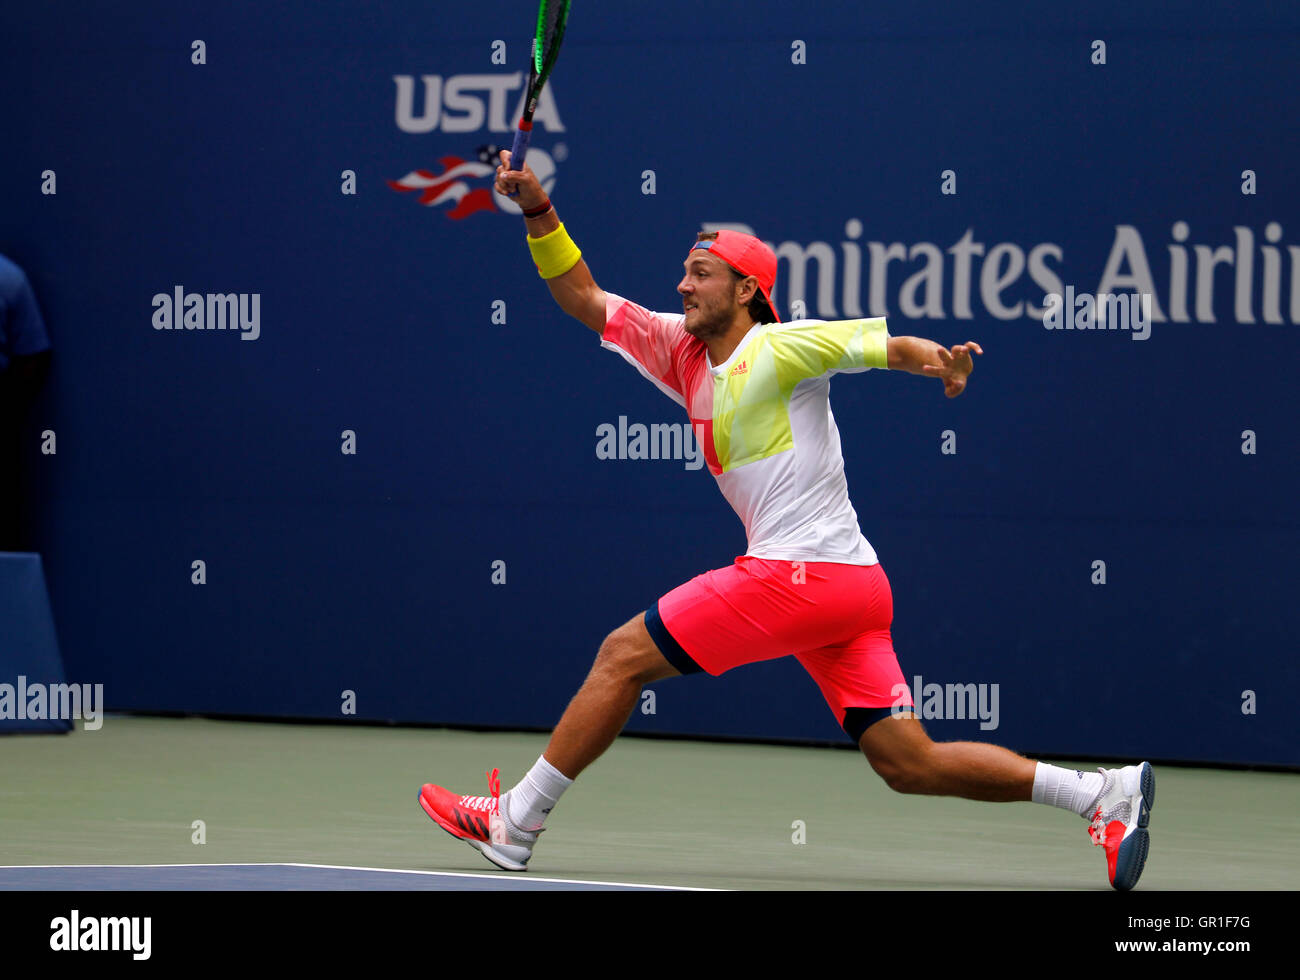 New York, USA. 6th September, 2016. Lucas Pouille of France during his quarterfinal match against countryman Gael Monfils  at the United States Open Tennis Championships at Flushing Meadows, New York on Tuesday, September 6th.  Monfils won the match in straight sets Credit:  Adam Stoltman/Alamy Live News Stock Photo